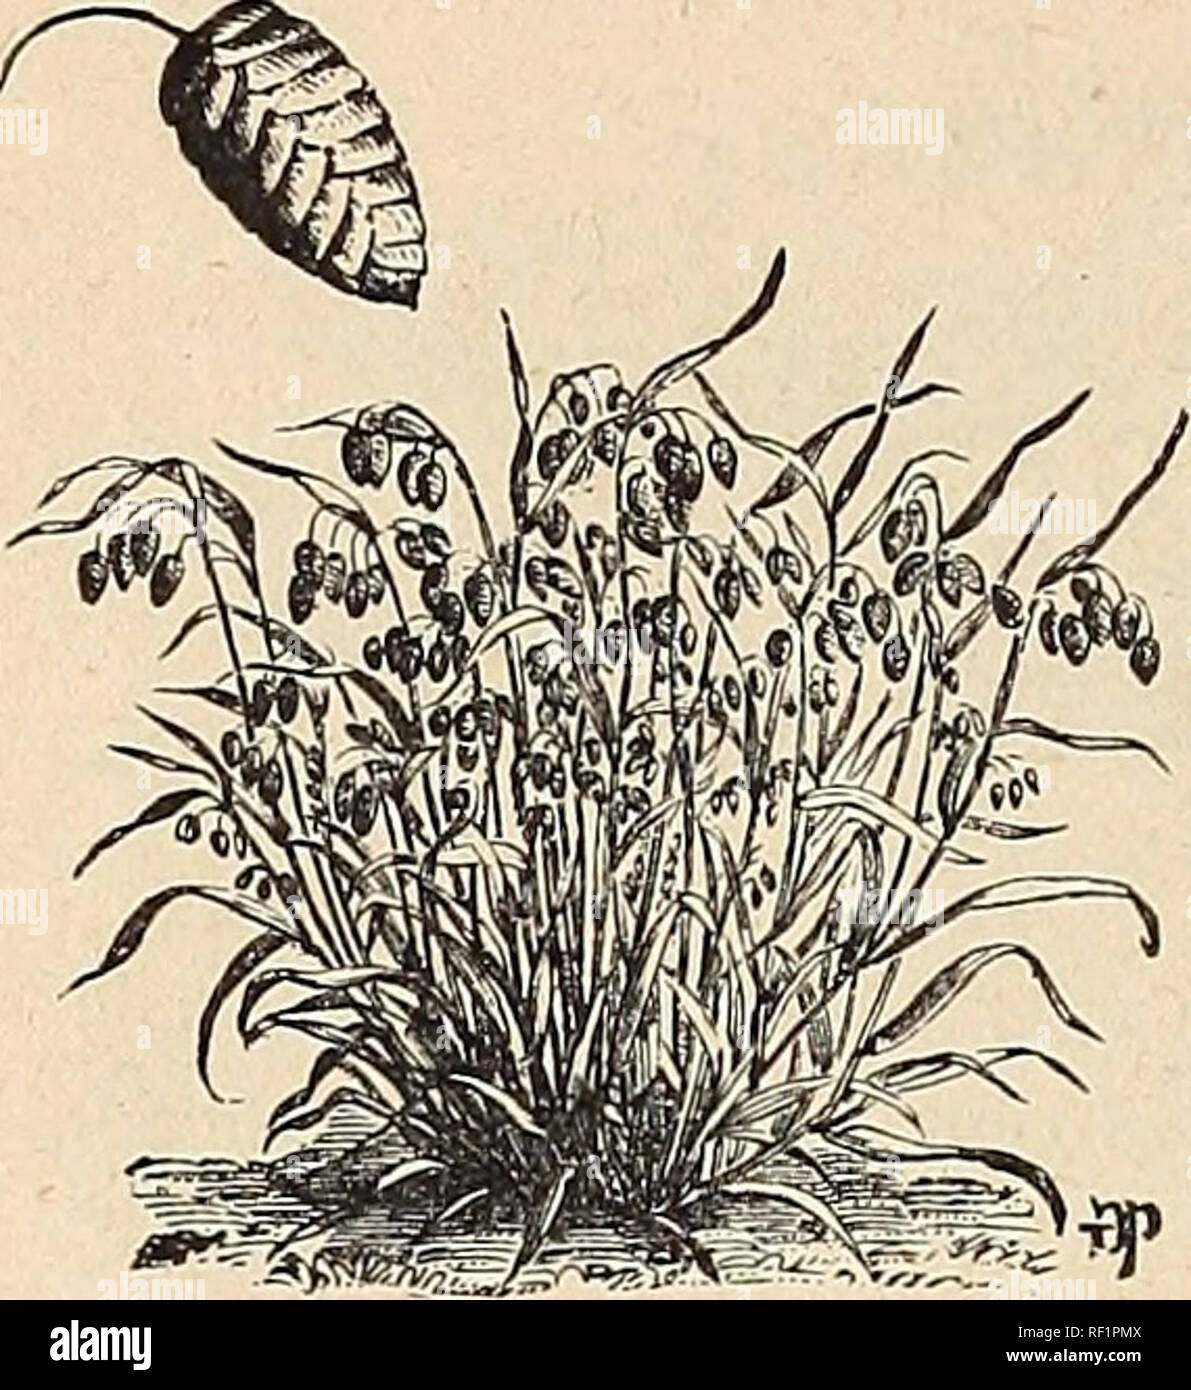 . Catalogue of Holland bulbs and plants : for fall planting.. Bulbs (Plants), Catalogs; Flowers, Catalogs. 40 HirtDii Sibley &amp; Co.''s. BRACHYPODIUM PLATYSTACHIUM. A distinct Grass, flat heads ; very effective. Natural per oz. 25 cts.; lb. $2.50 BRIZA MAXIMA. The well known Quaking Grass. Natural per oz. 15 cts; lb. $1.50 Bleached, pure white &quot; 25 'â &quot; 2.50 Dyed, in colors &quot; 20 &quot; &quot; 2.00 BRIZA MEDIA. The elegant English trembling Grass ; very pretty and BRIZA MAXIMA. graceful. Natural per oz. 15 cts.; lb. $1.50 Bleached, pure white &quot; 25 &quot; &quot; 2.50 Dyed,  Stock Photo